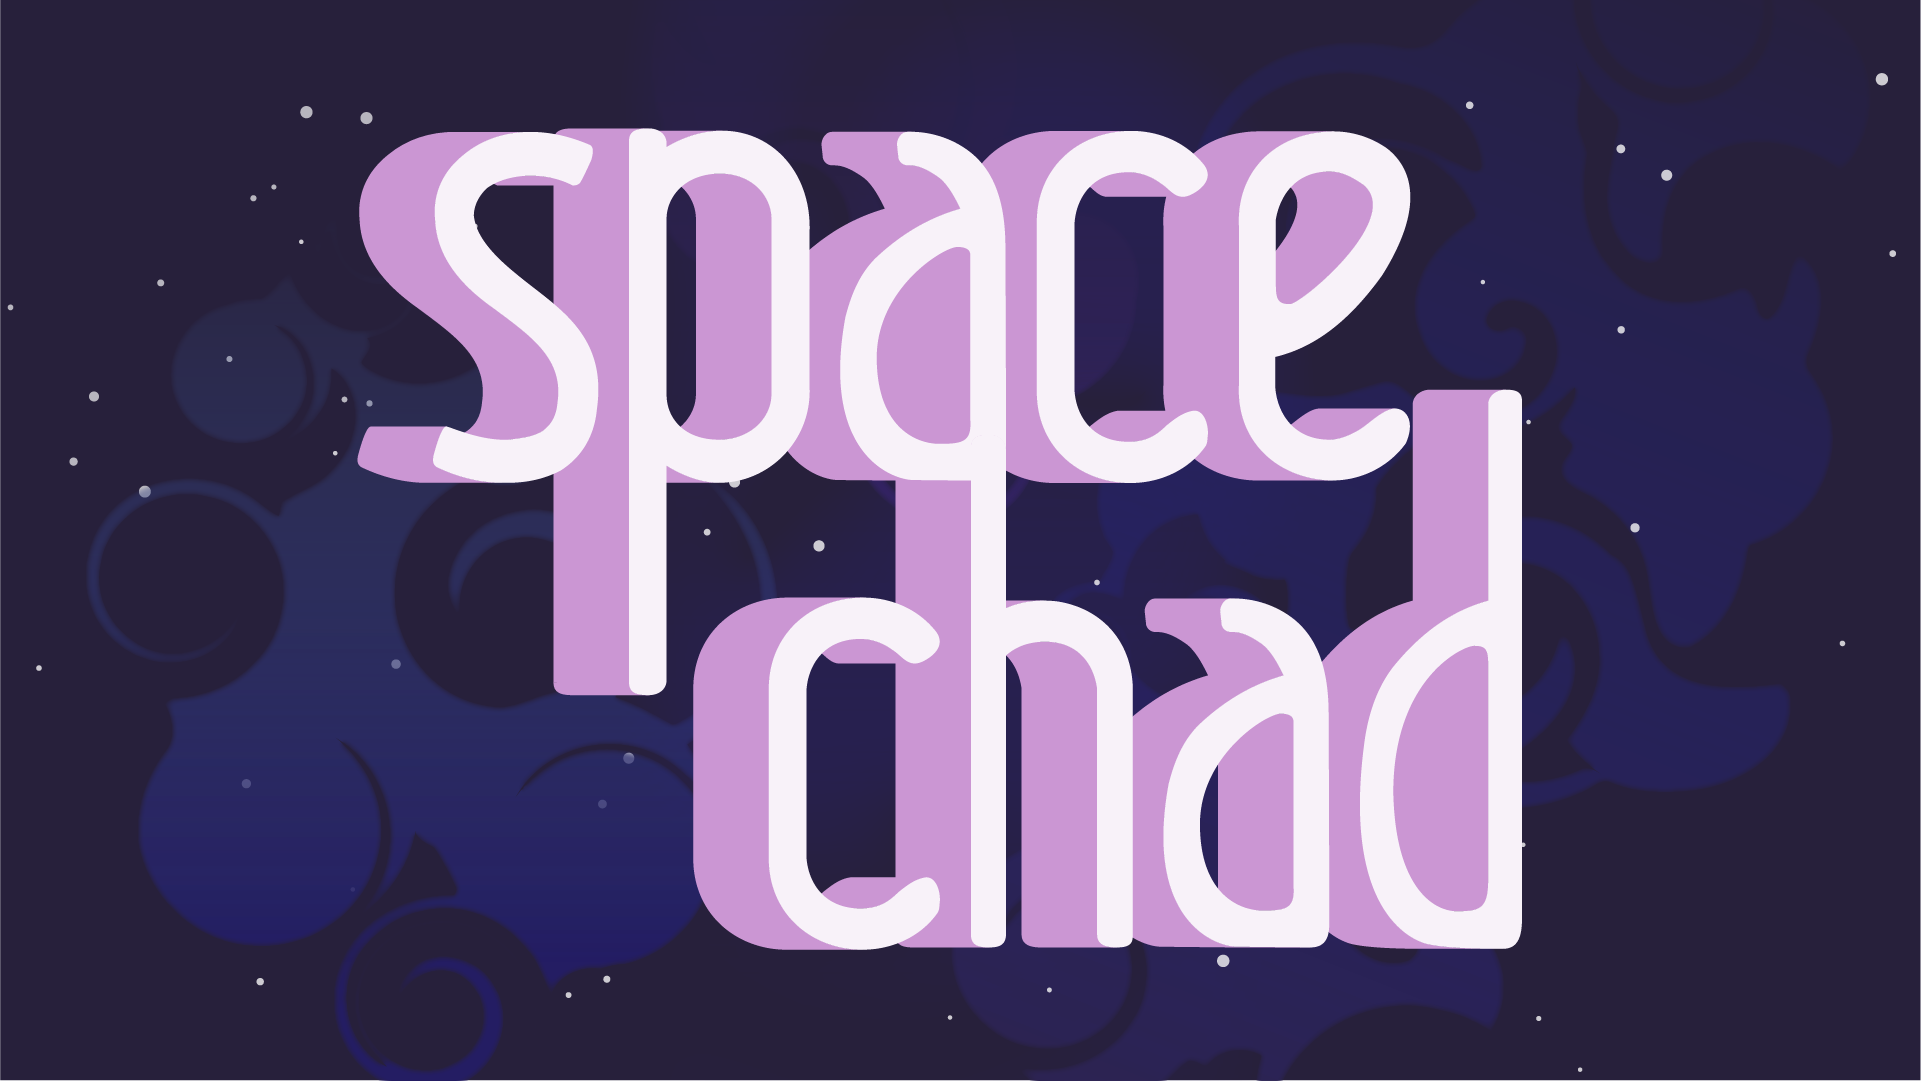 Space Chad